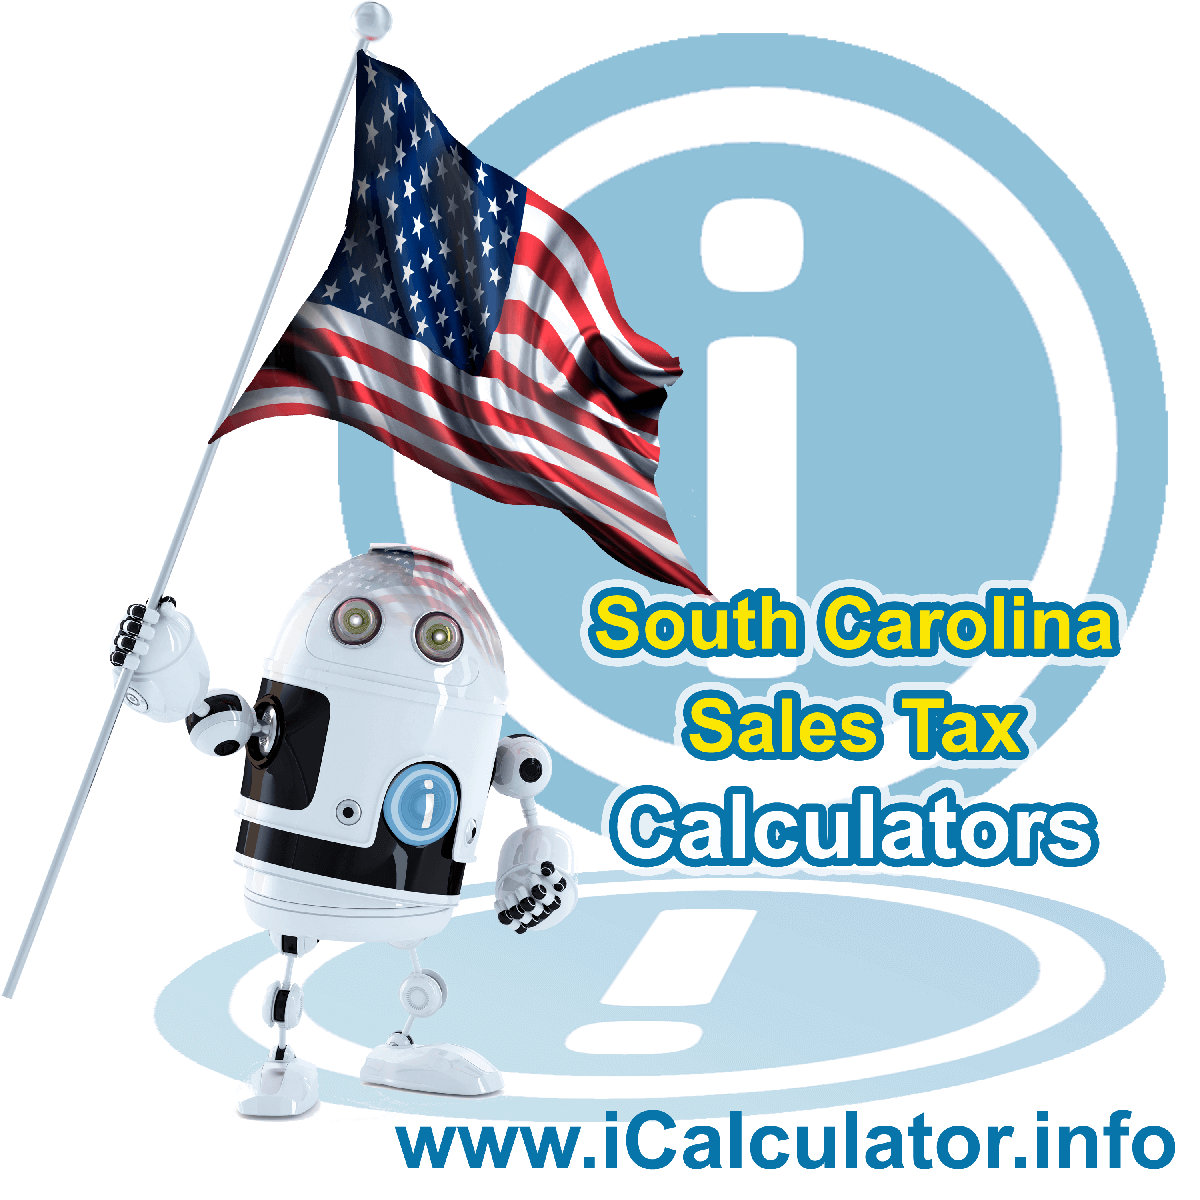 Travelers Rest Sales Rates: This image illustrates a calculator robot calculating Travelers Rest sales tax manually using the Travelers Rest Sales Tax Formula. You can use this information to calculate Travelers Rest Sales Tax manually or use the Travelers Rest Sales Tax Calculator to calculate sales tax online.